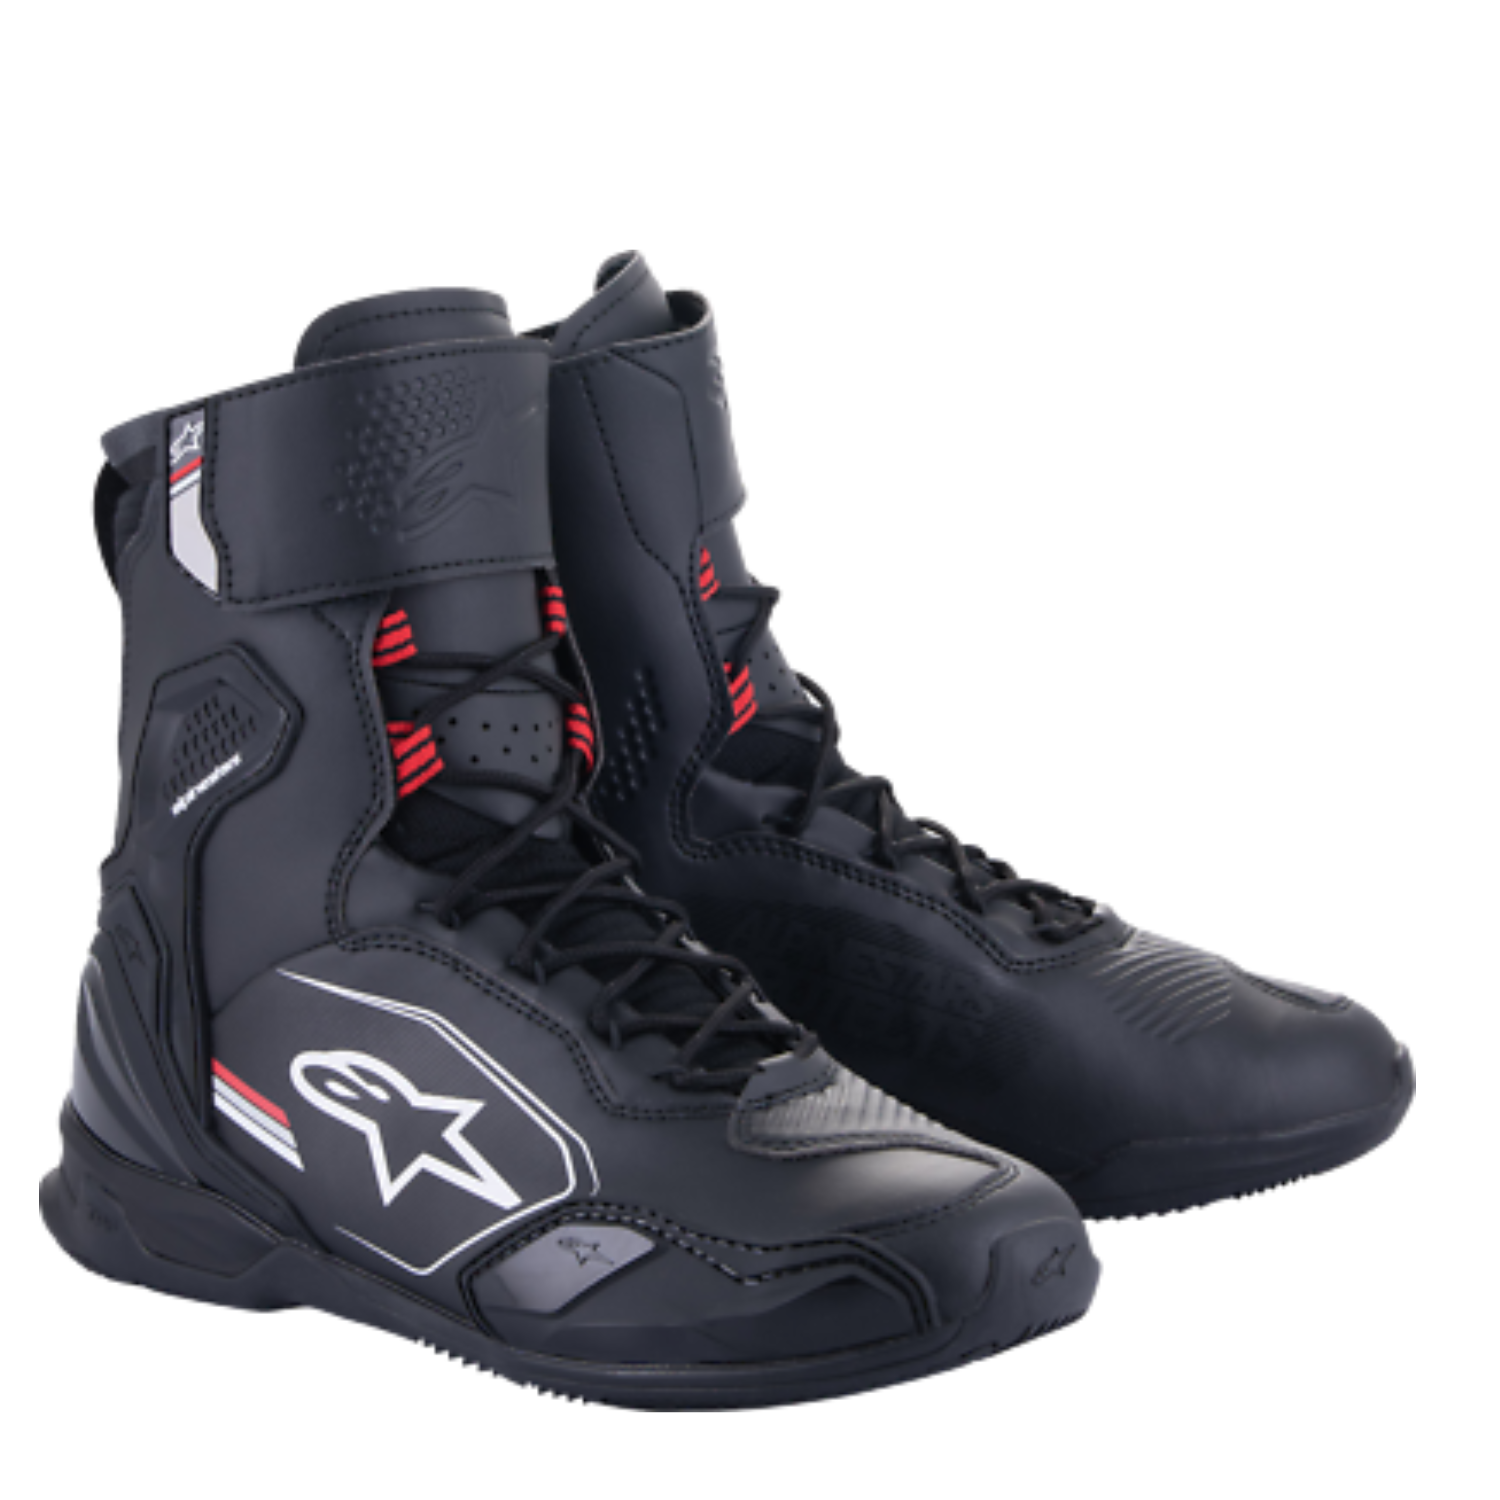 Image of Alpinestars Superfaster Shoes Black Gray Bright Red Size US 6 EN